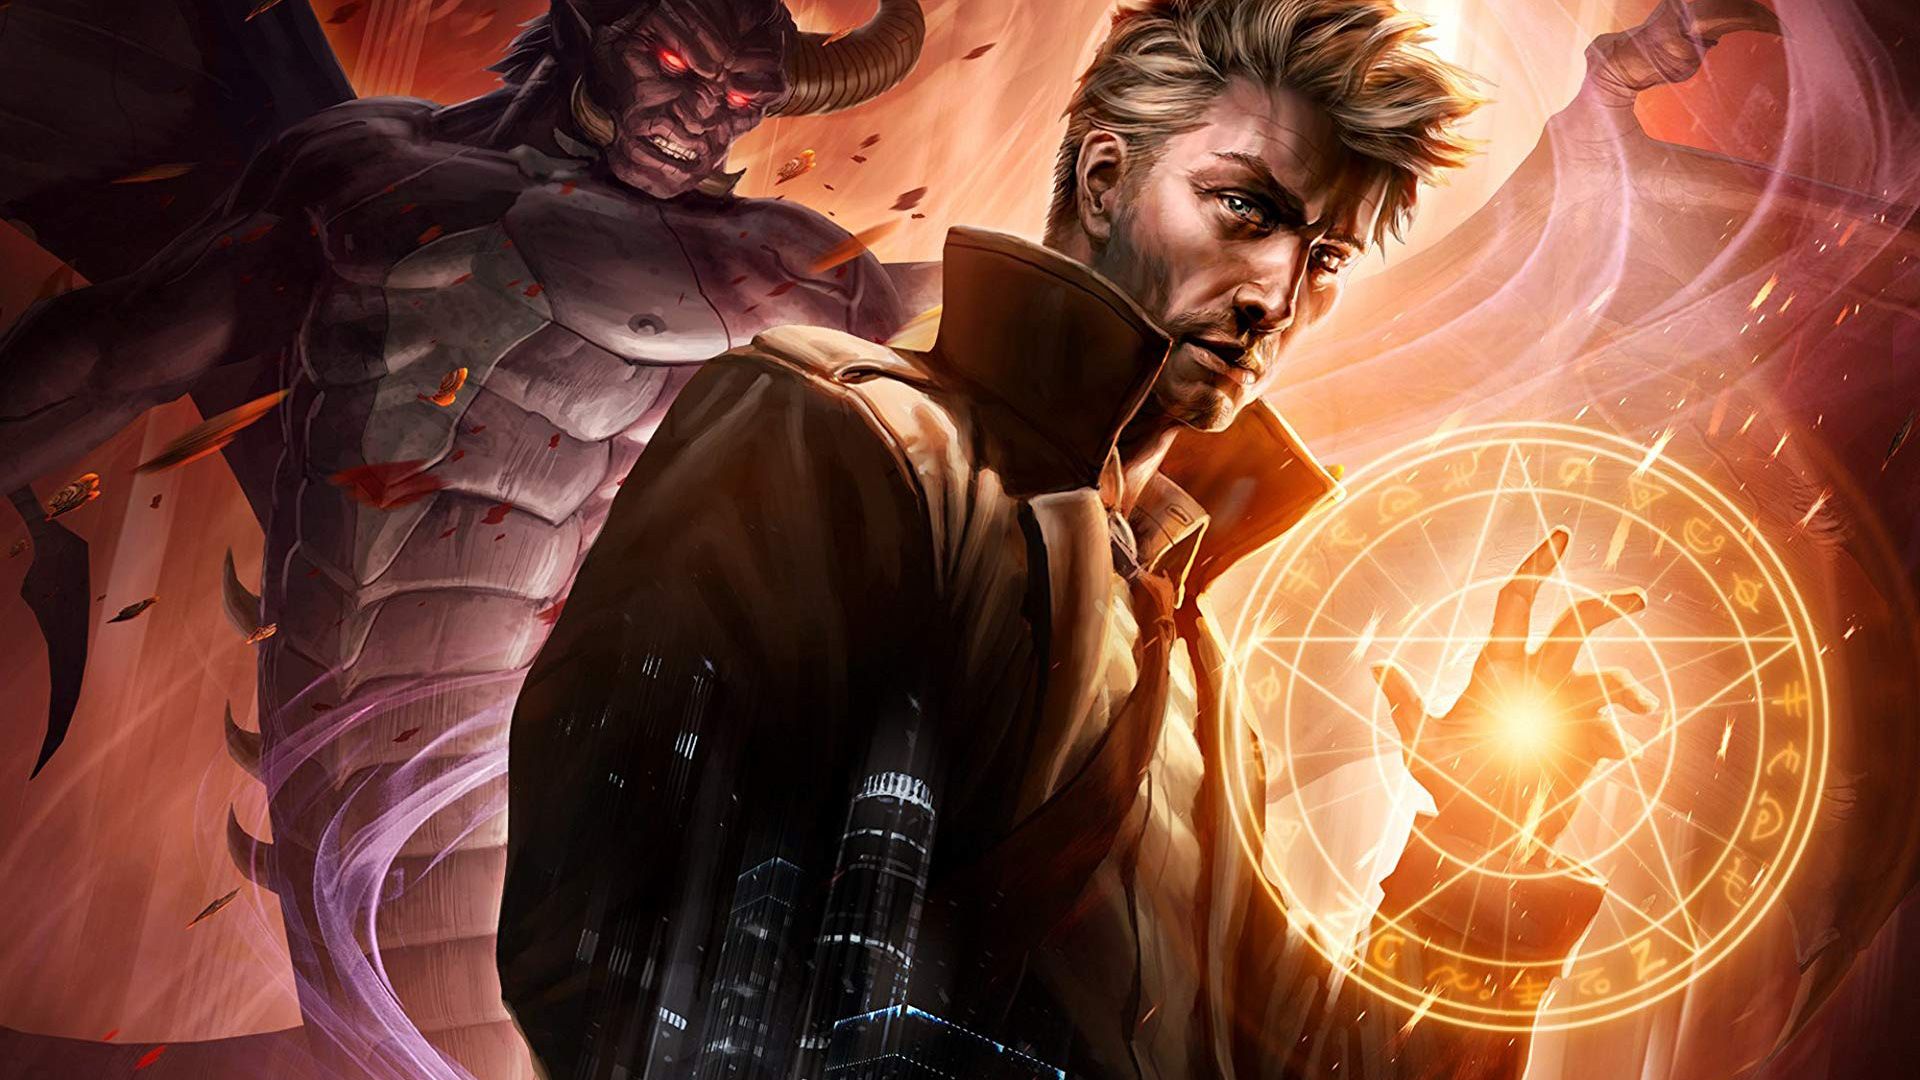 Constantine: City of Demons - The Movie background